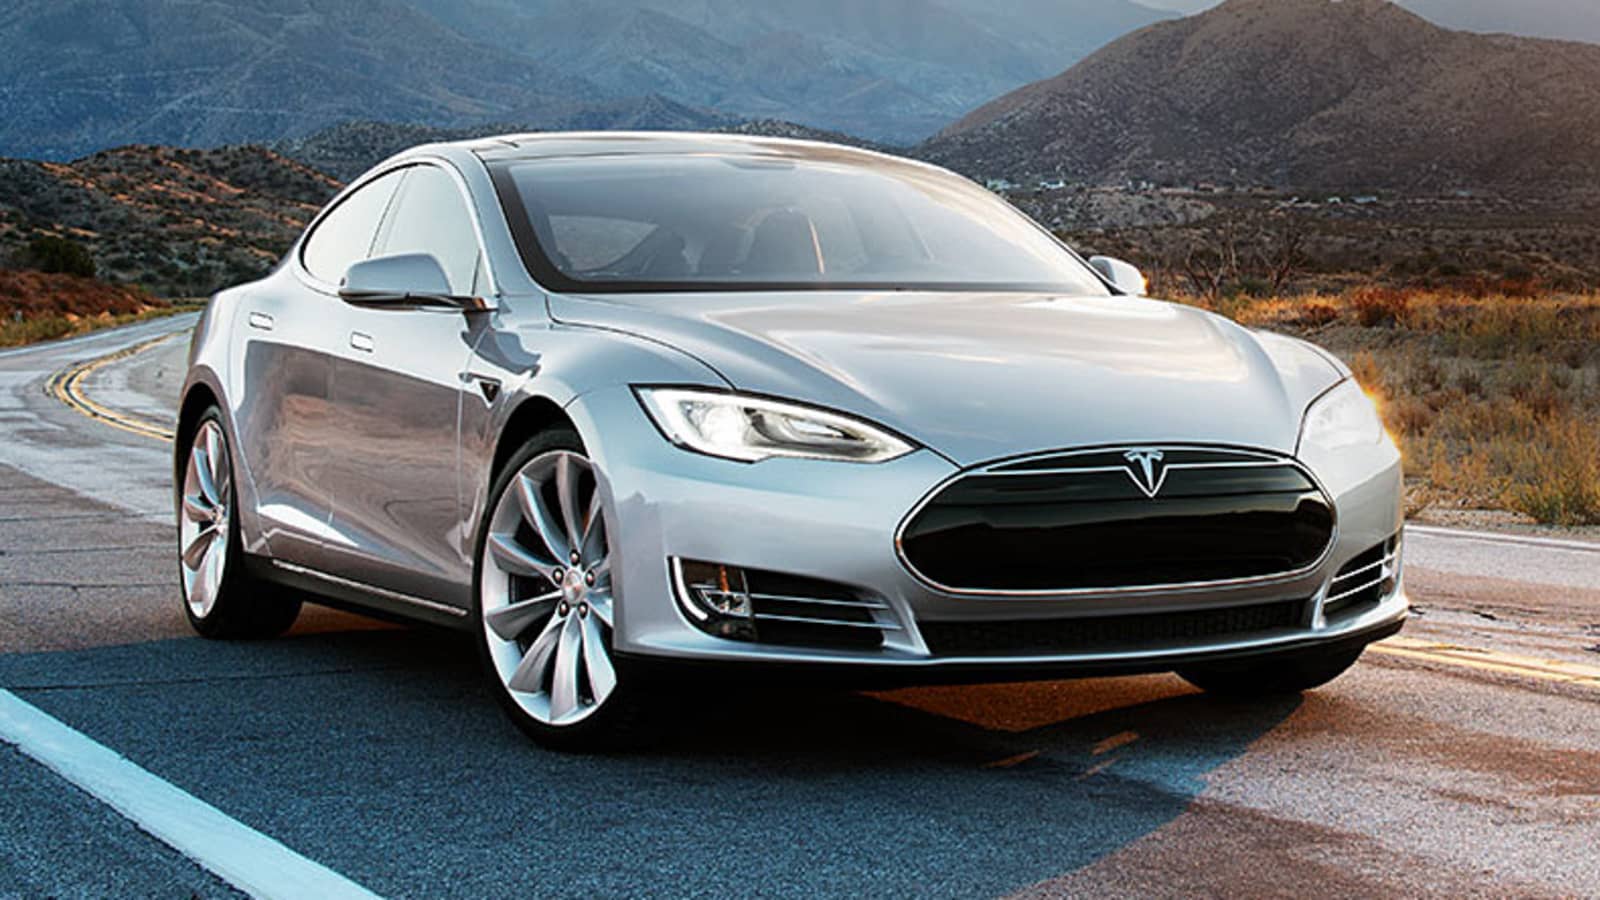 Consumer Reports: Tesla Model S Among Best Ever Reviewed